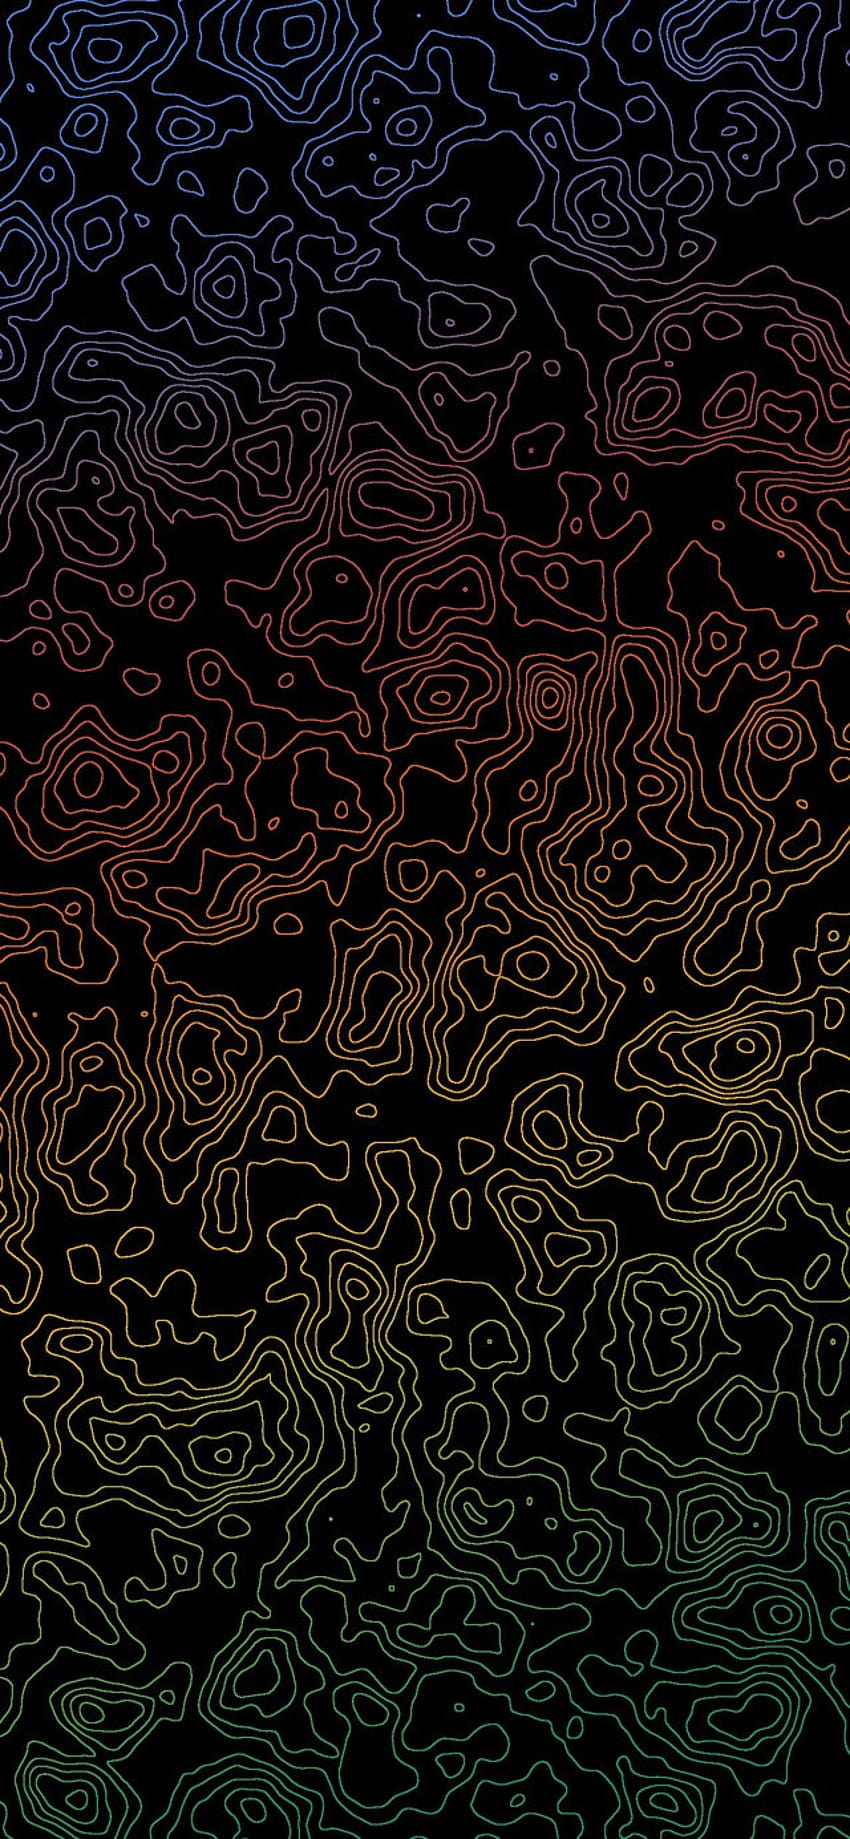 Updated] 24 Damascus/Topographic AMOLED [1440x3200] : r/Amoledbackgrounds, topographic iphone HD phone wallpaper